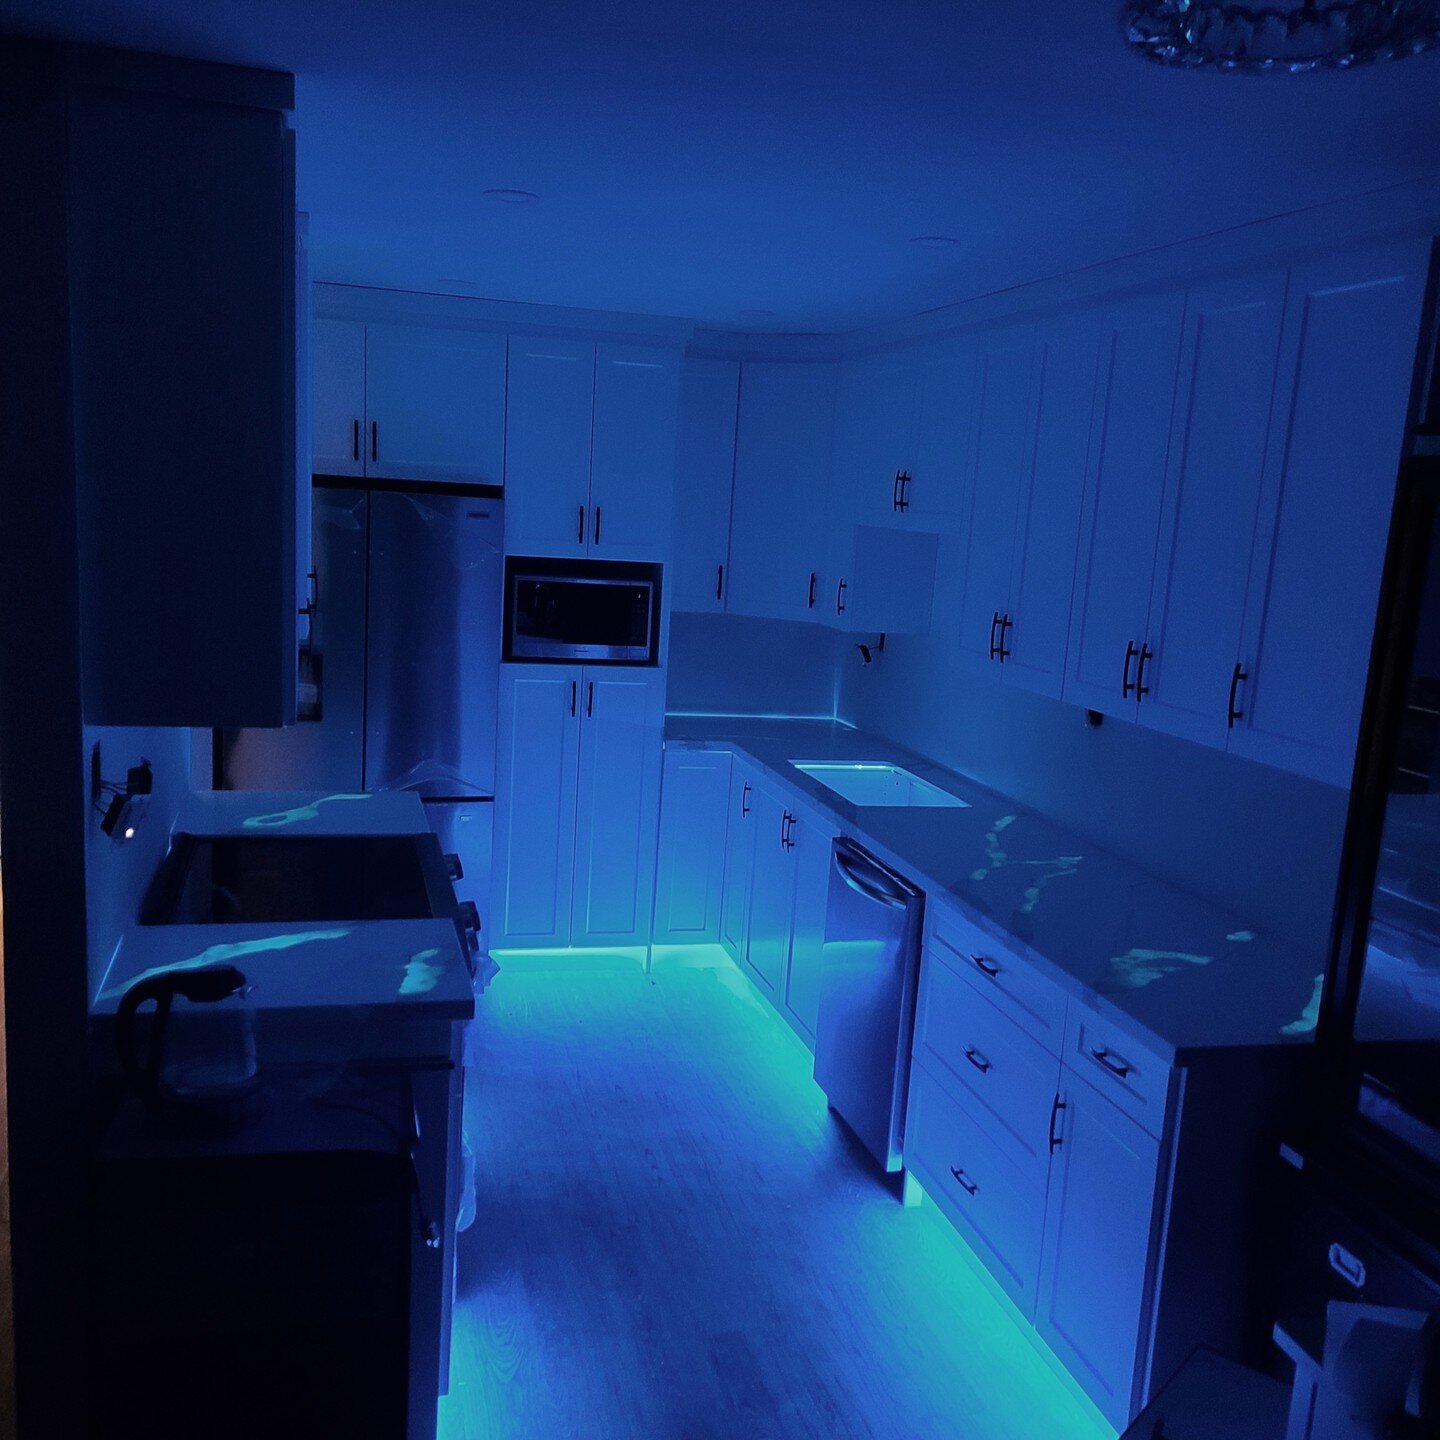 Our friend in Coquitlam was looking for a full kitchen and floor renovation from new appliances &amp;cabinets, vinyl flooring, quartz counters, pot lights, and much more. They also wanted to have a custom look to the room with these custom inset LED 